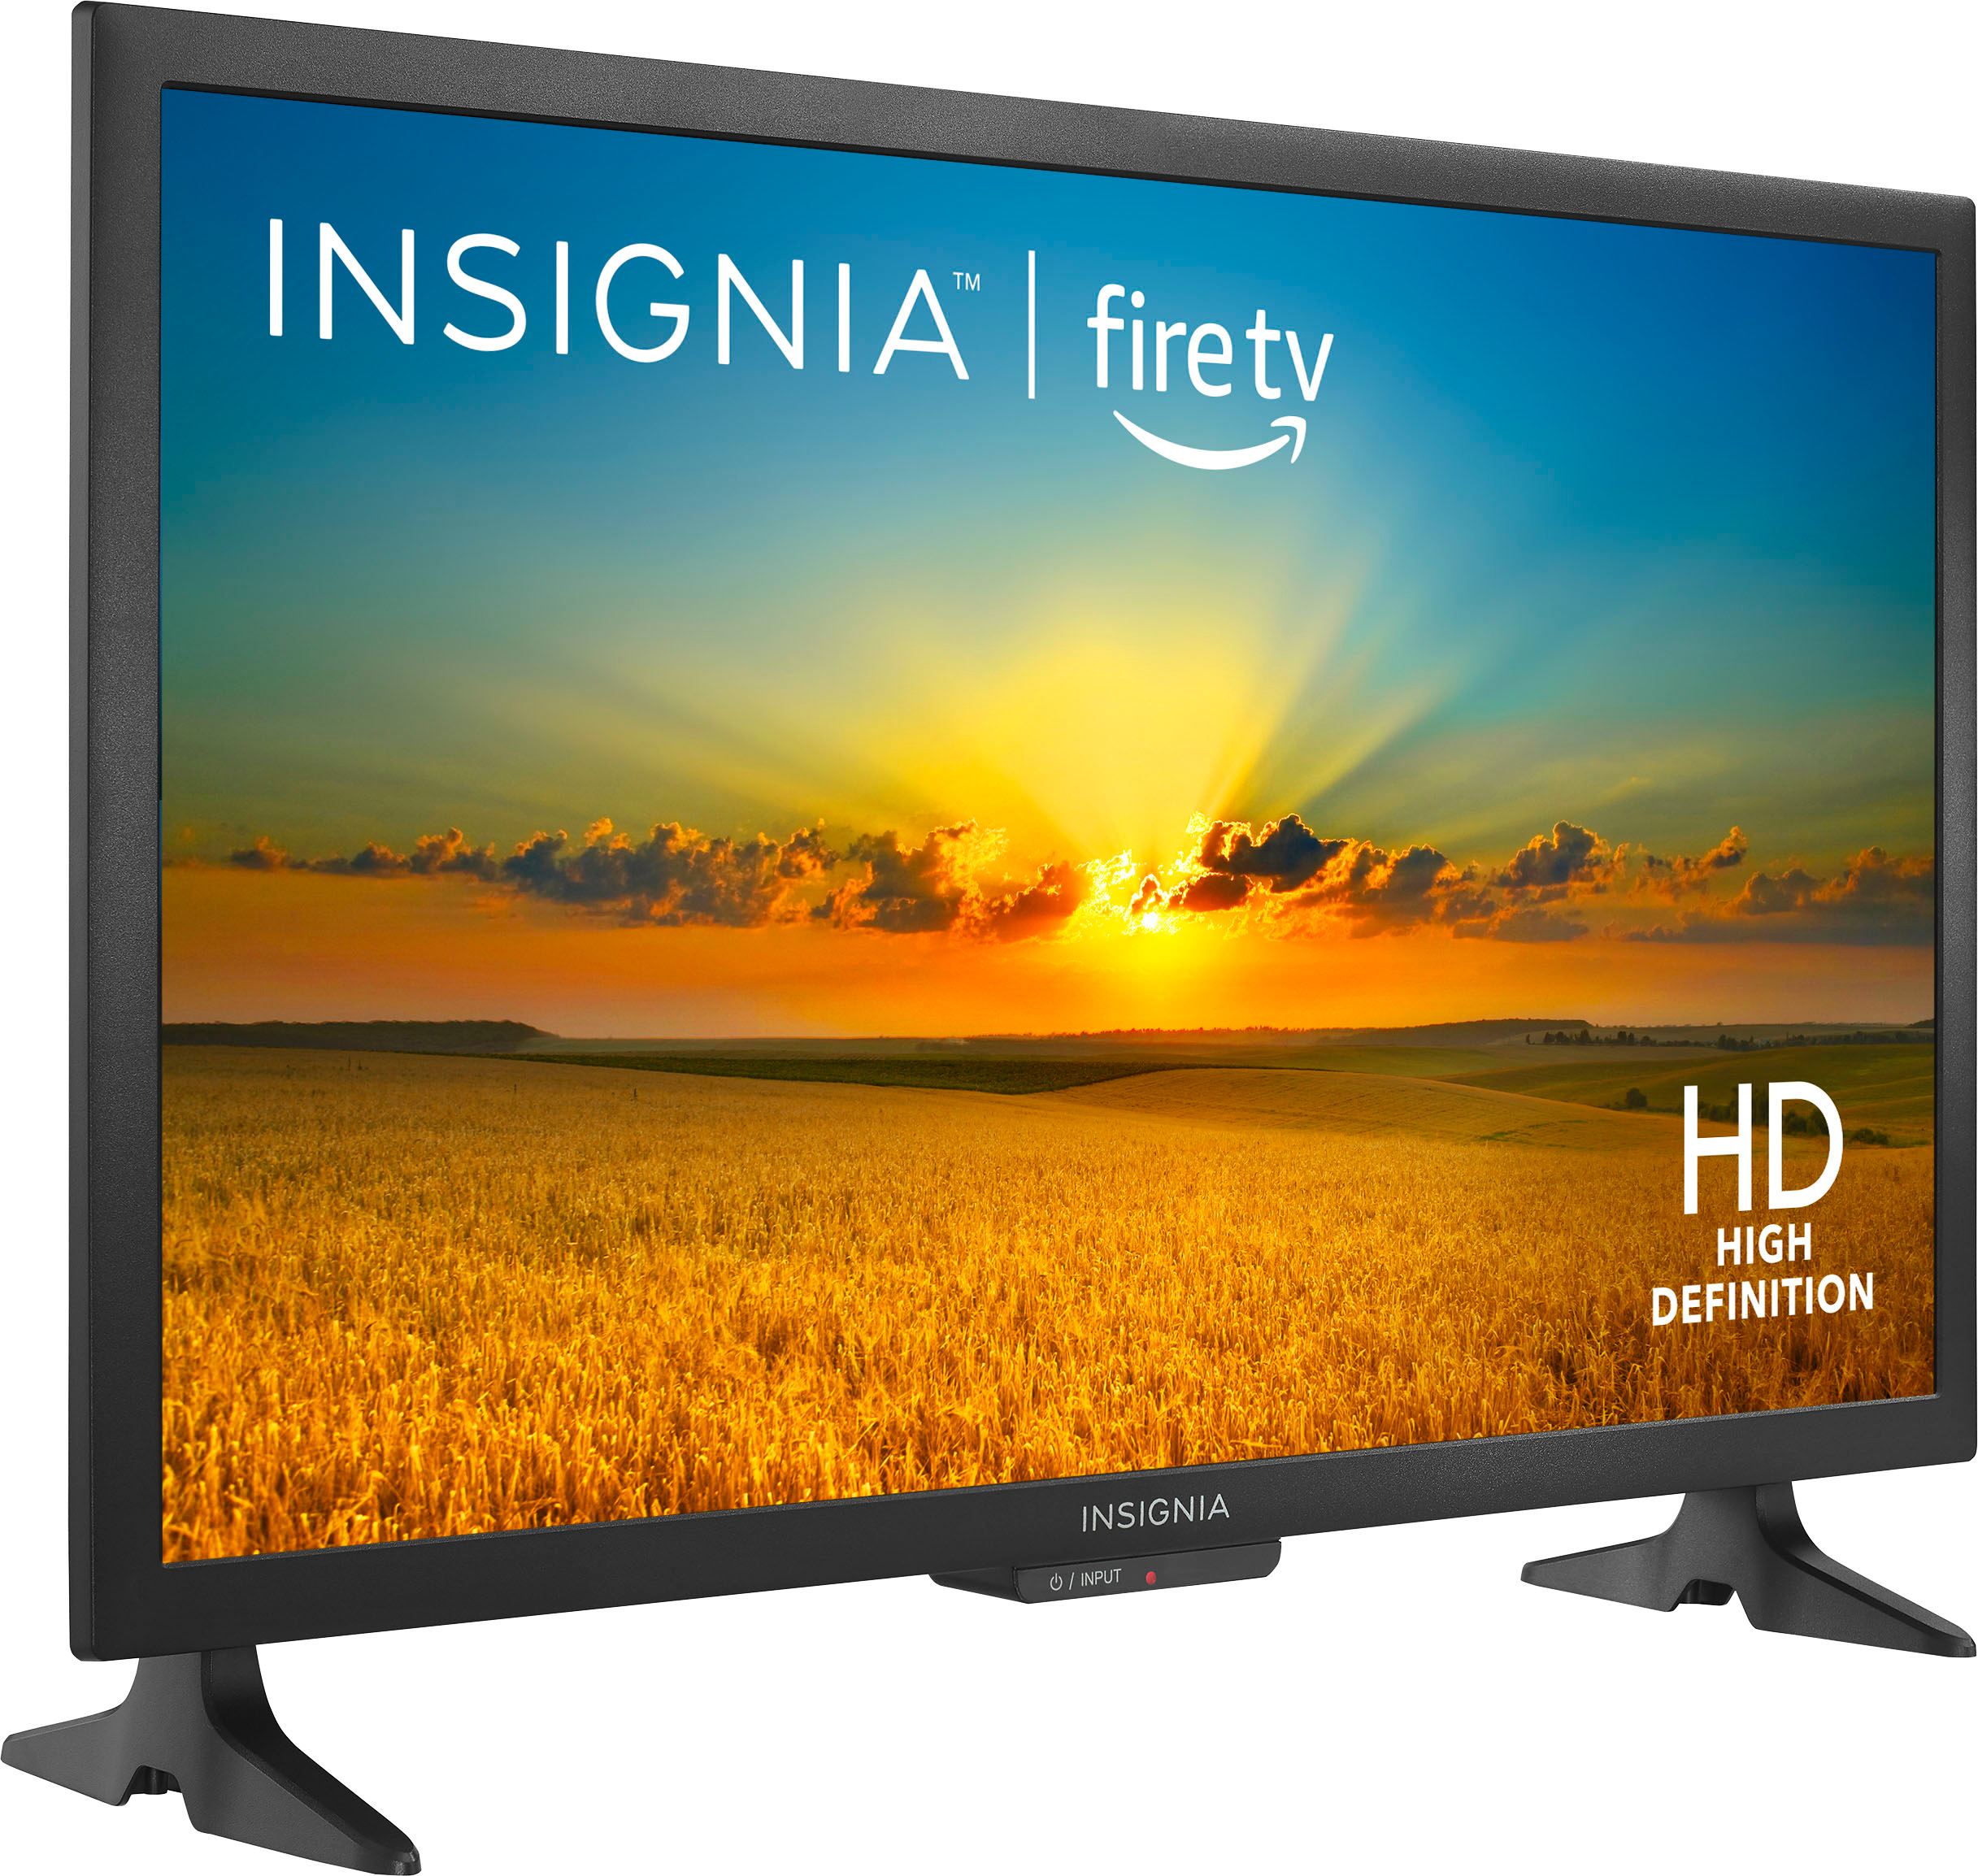 Angle View: Insignia™ - 24" Class F20 Series LED HD Smart Fire TV